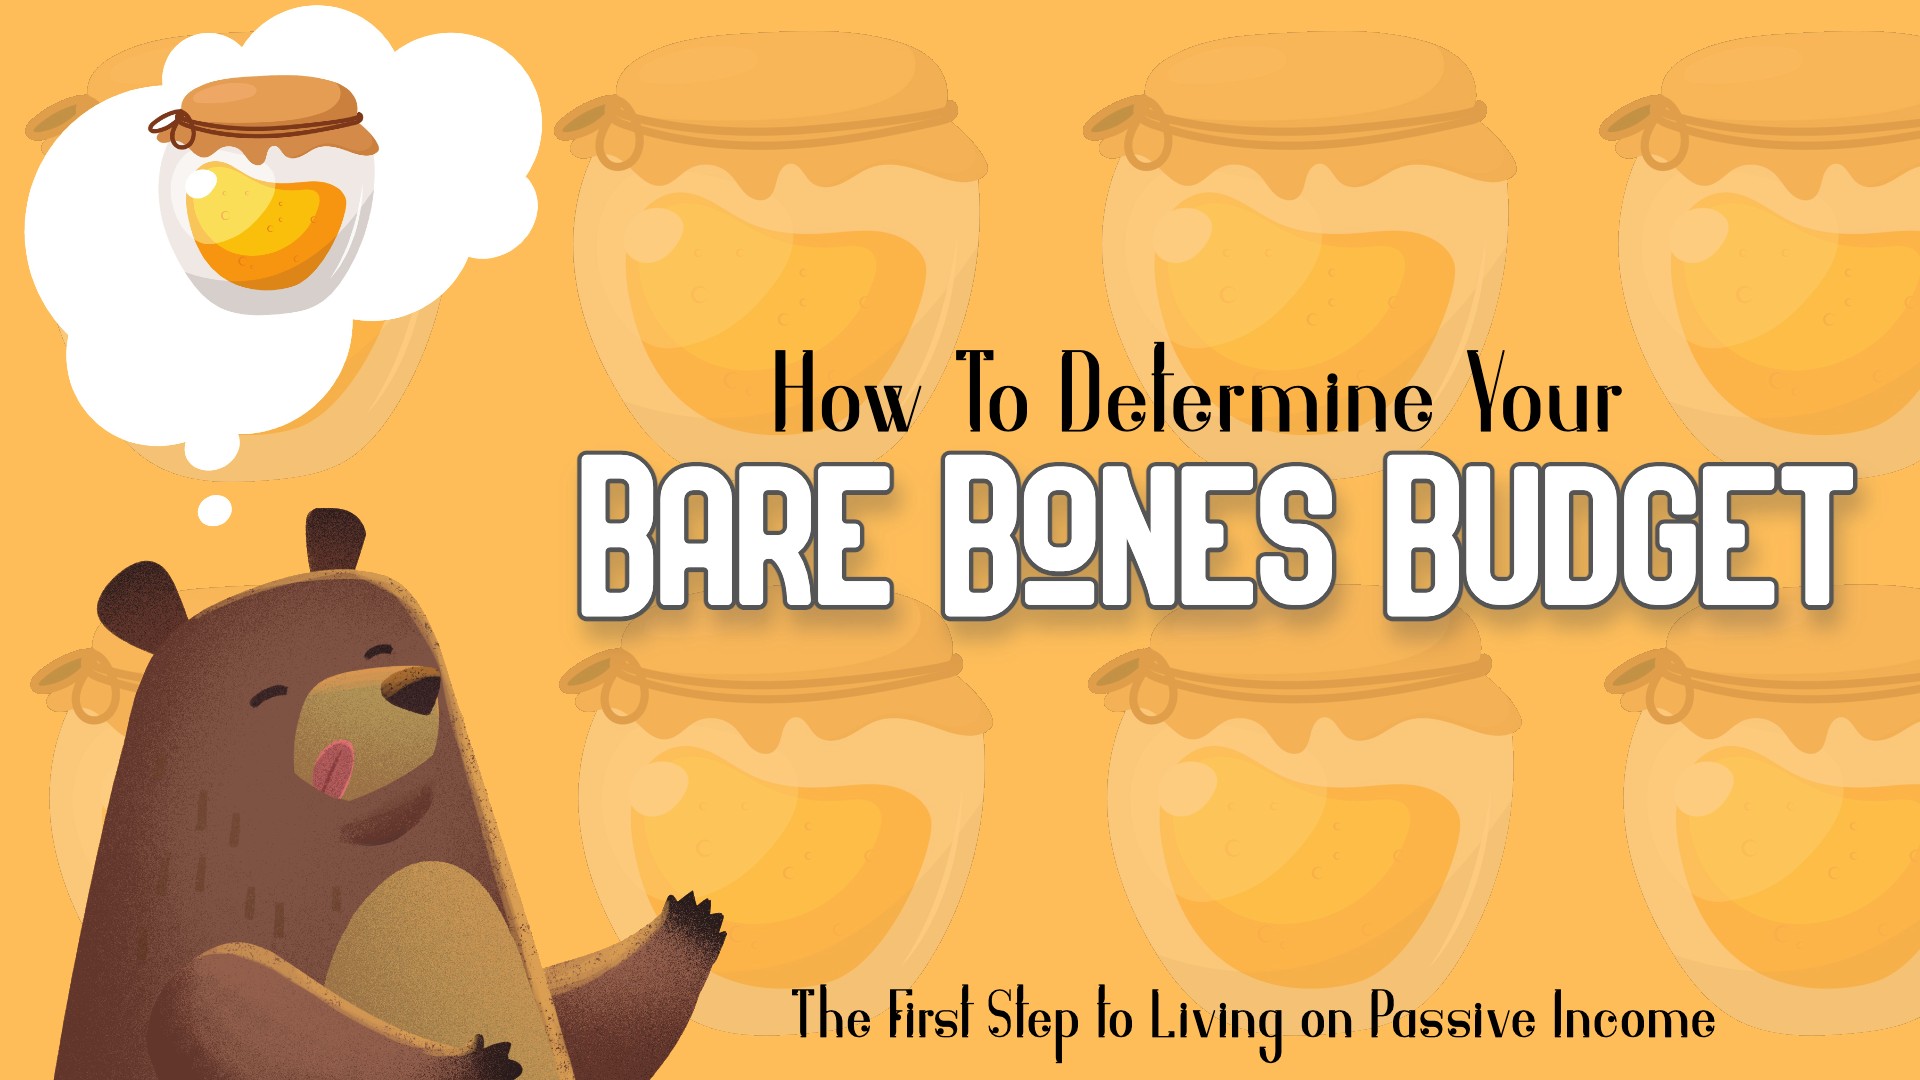 How to Determine Your Bare Bones Budget: The First Step to Living on Passive Income